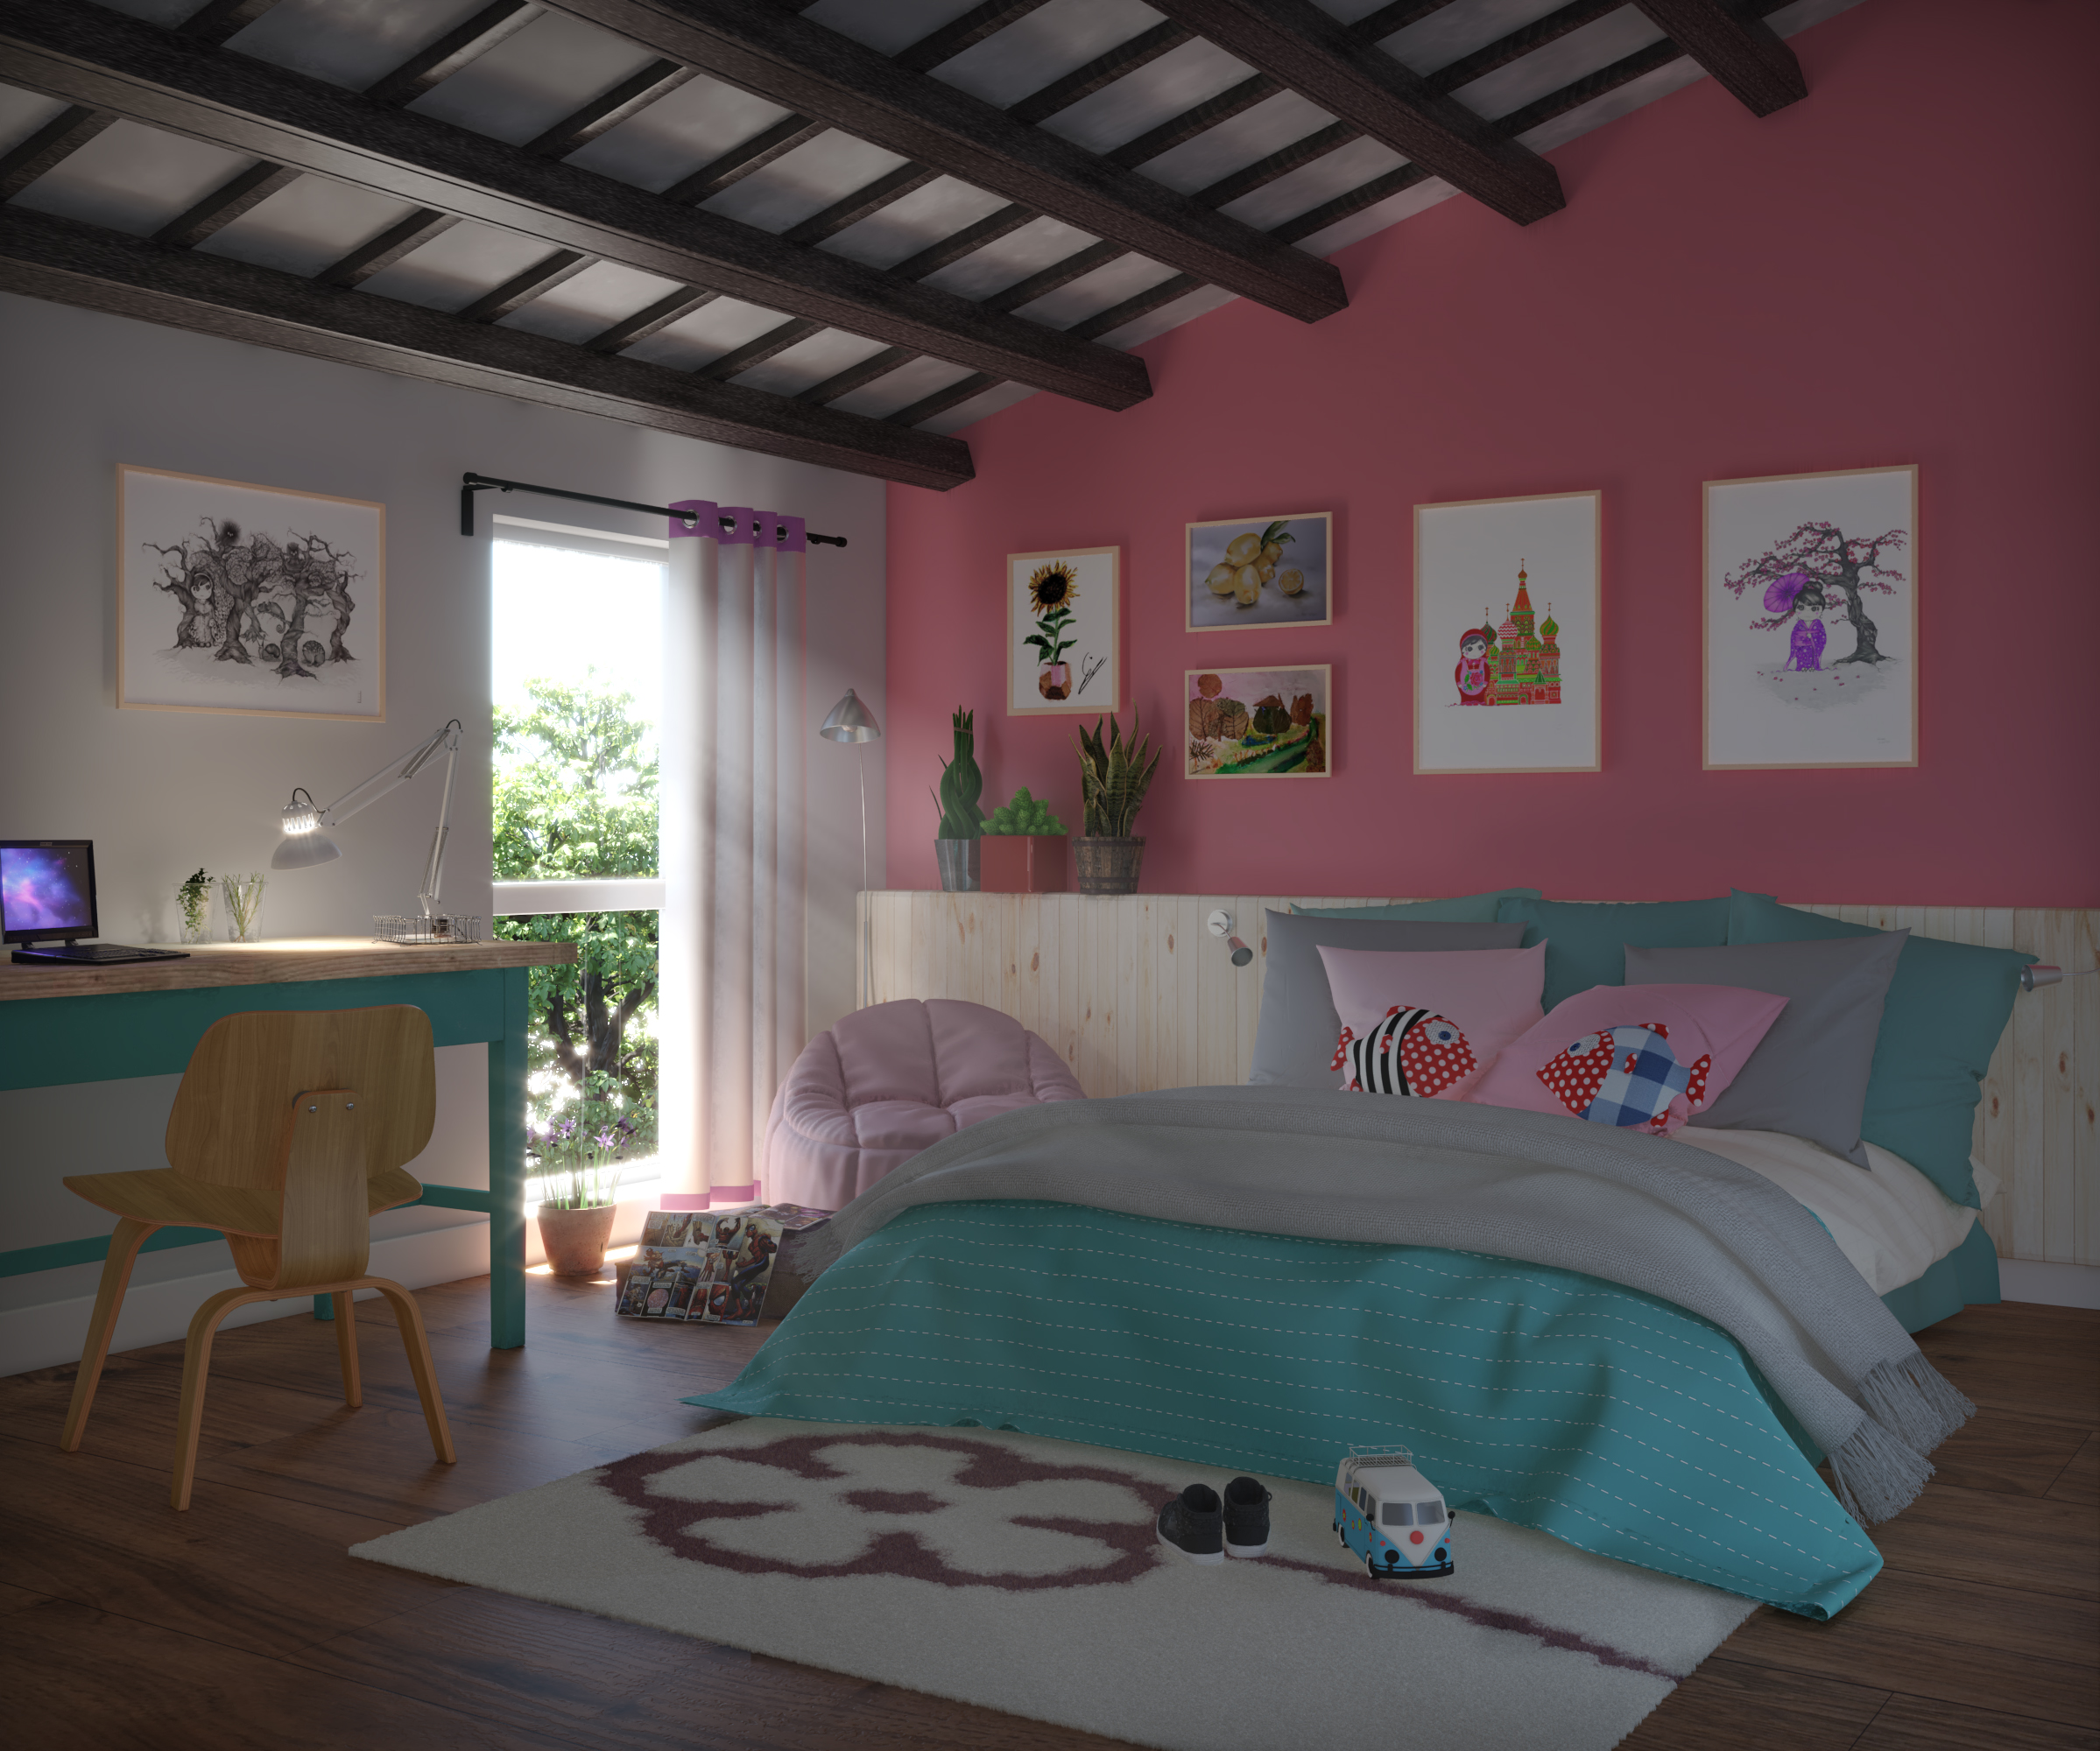 Farmhouse reform II in 3d max vray 5.0 image